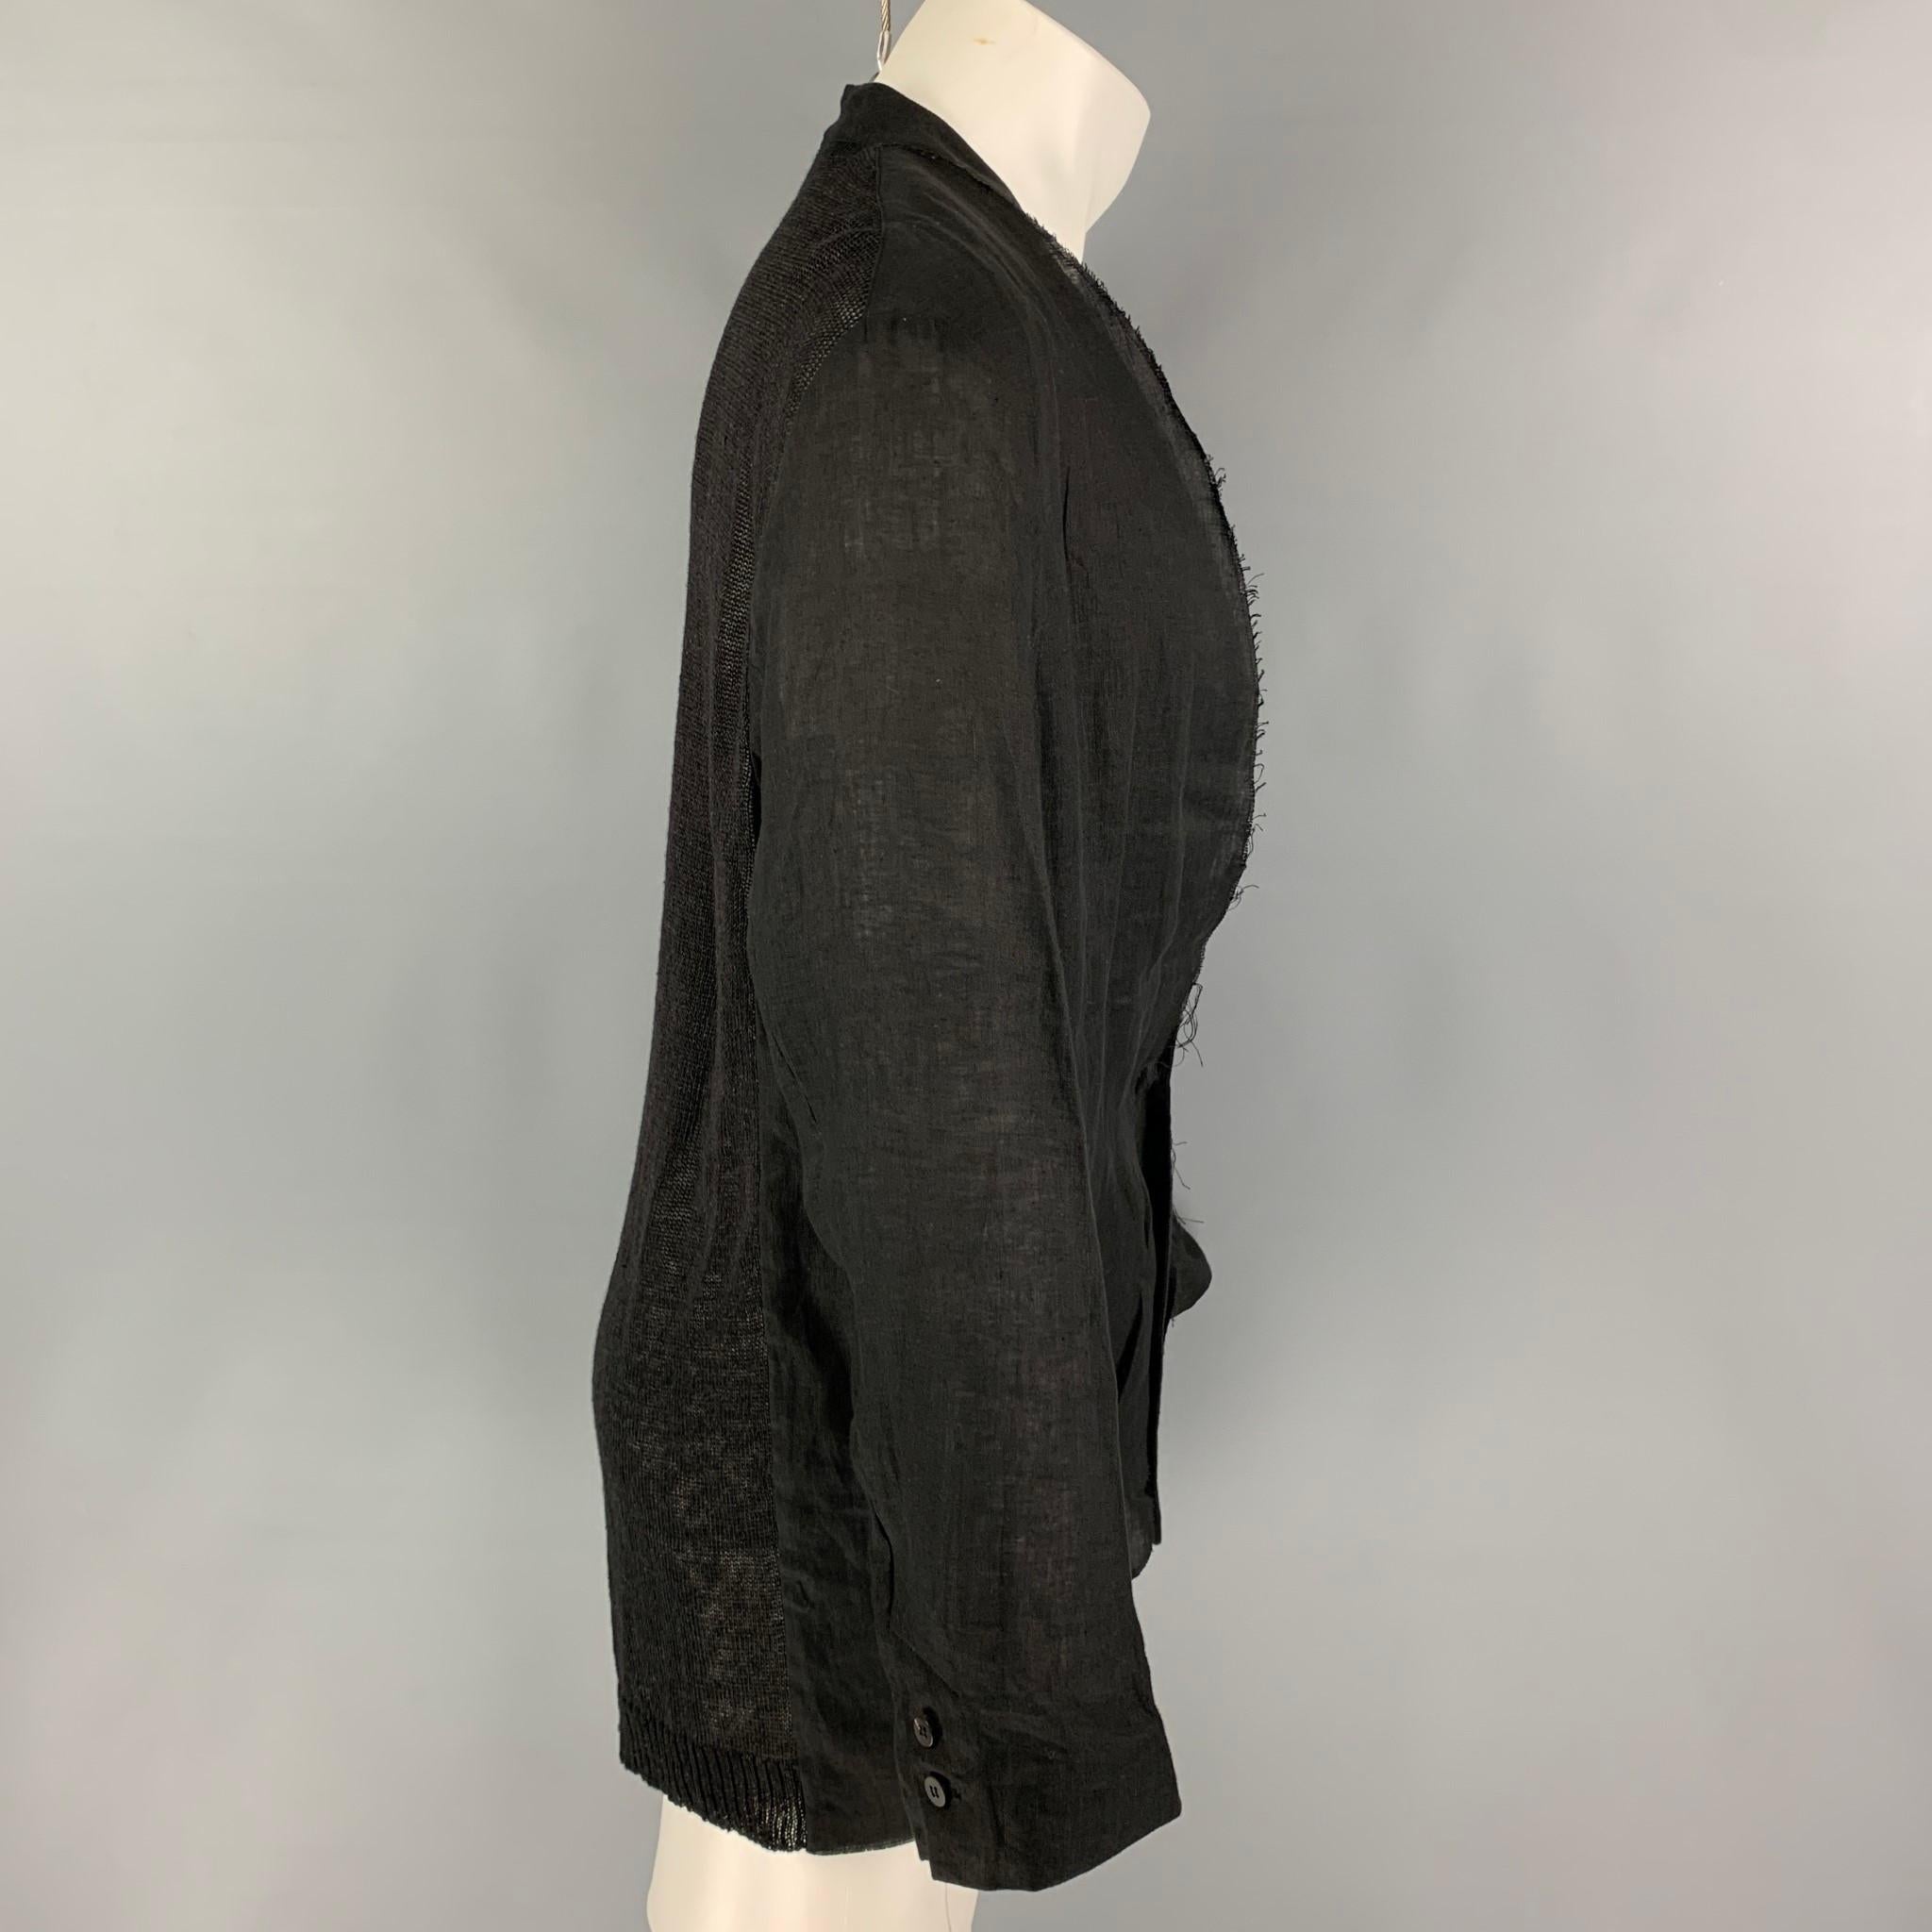 ISABEL BENENATO SS 17 jacket comes in a black mixed fabrics featuring a shawl flap detail, patch pockets, knitted back, and a single button closure. Made in Italy. 

Excellent Pre-Owned Condition.
Marked: 50

Measurements:

Shoulder: 19.5 in.
Chest: